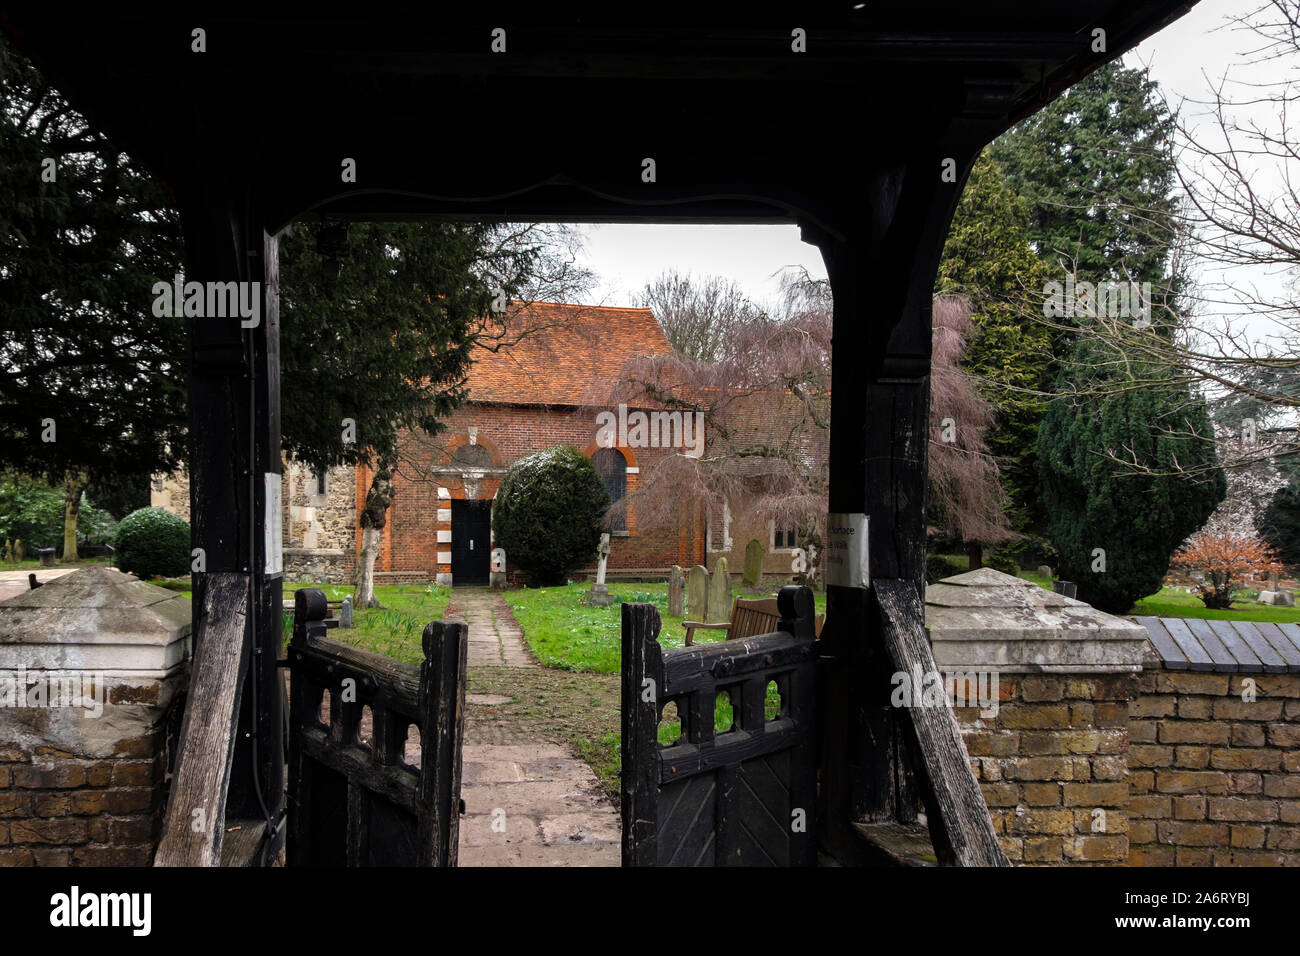 London, UK - March 17 2018: Entrance to St Dunstan's Church through a wooden gate, in Cranford Park. The oldest surviving part is its 15th-century tow Stock Photo